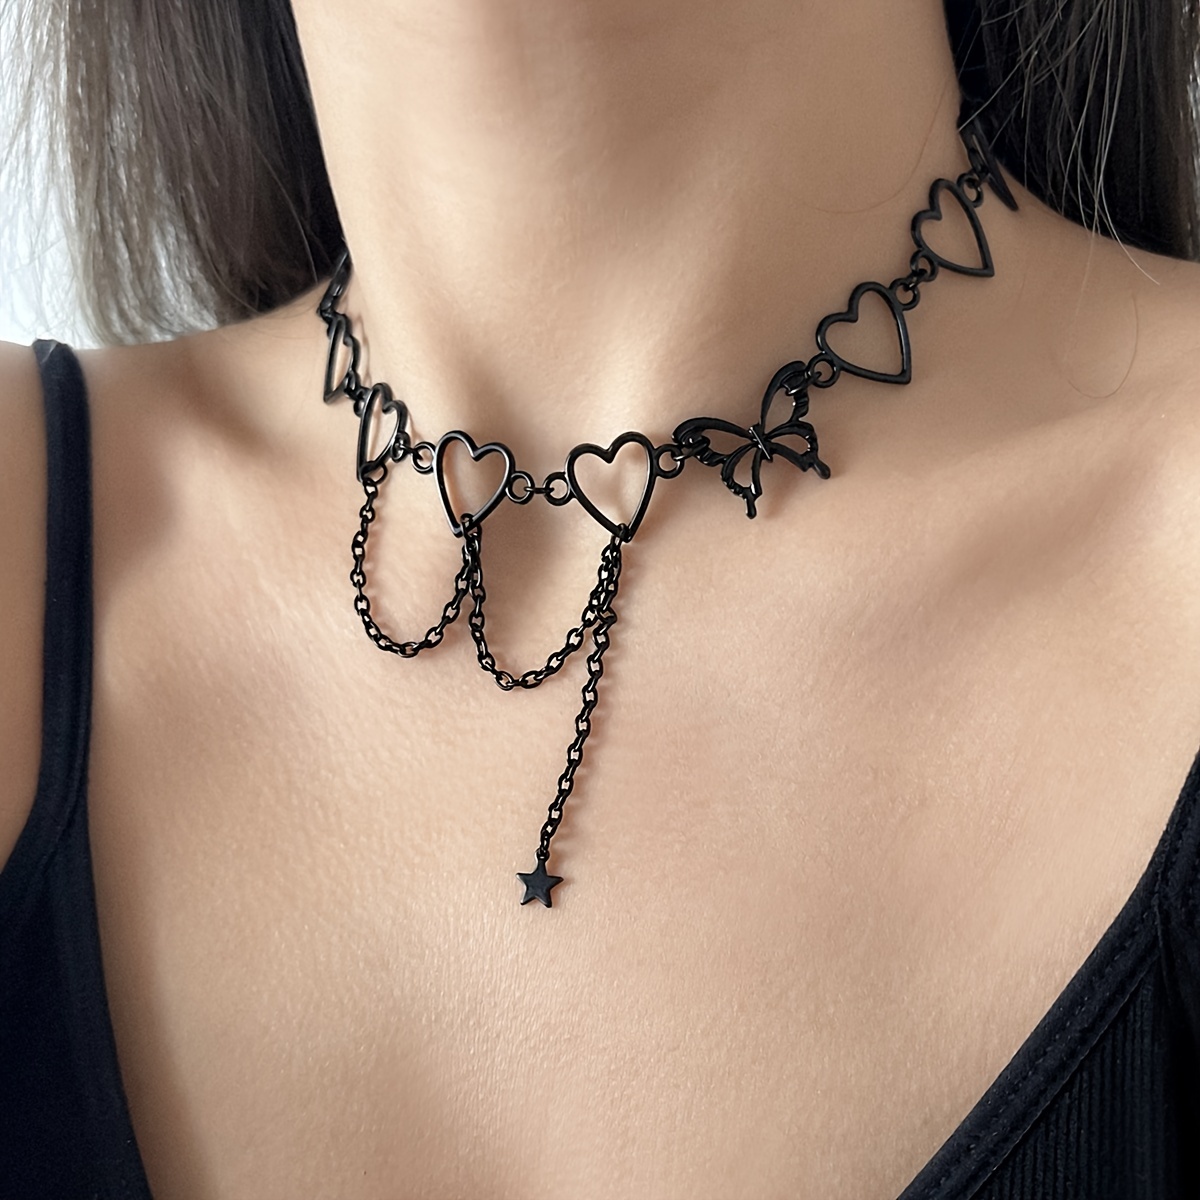 Punk Love Heart Bowknot Bell Adjustable Leather Choker PU Necklace